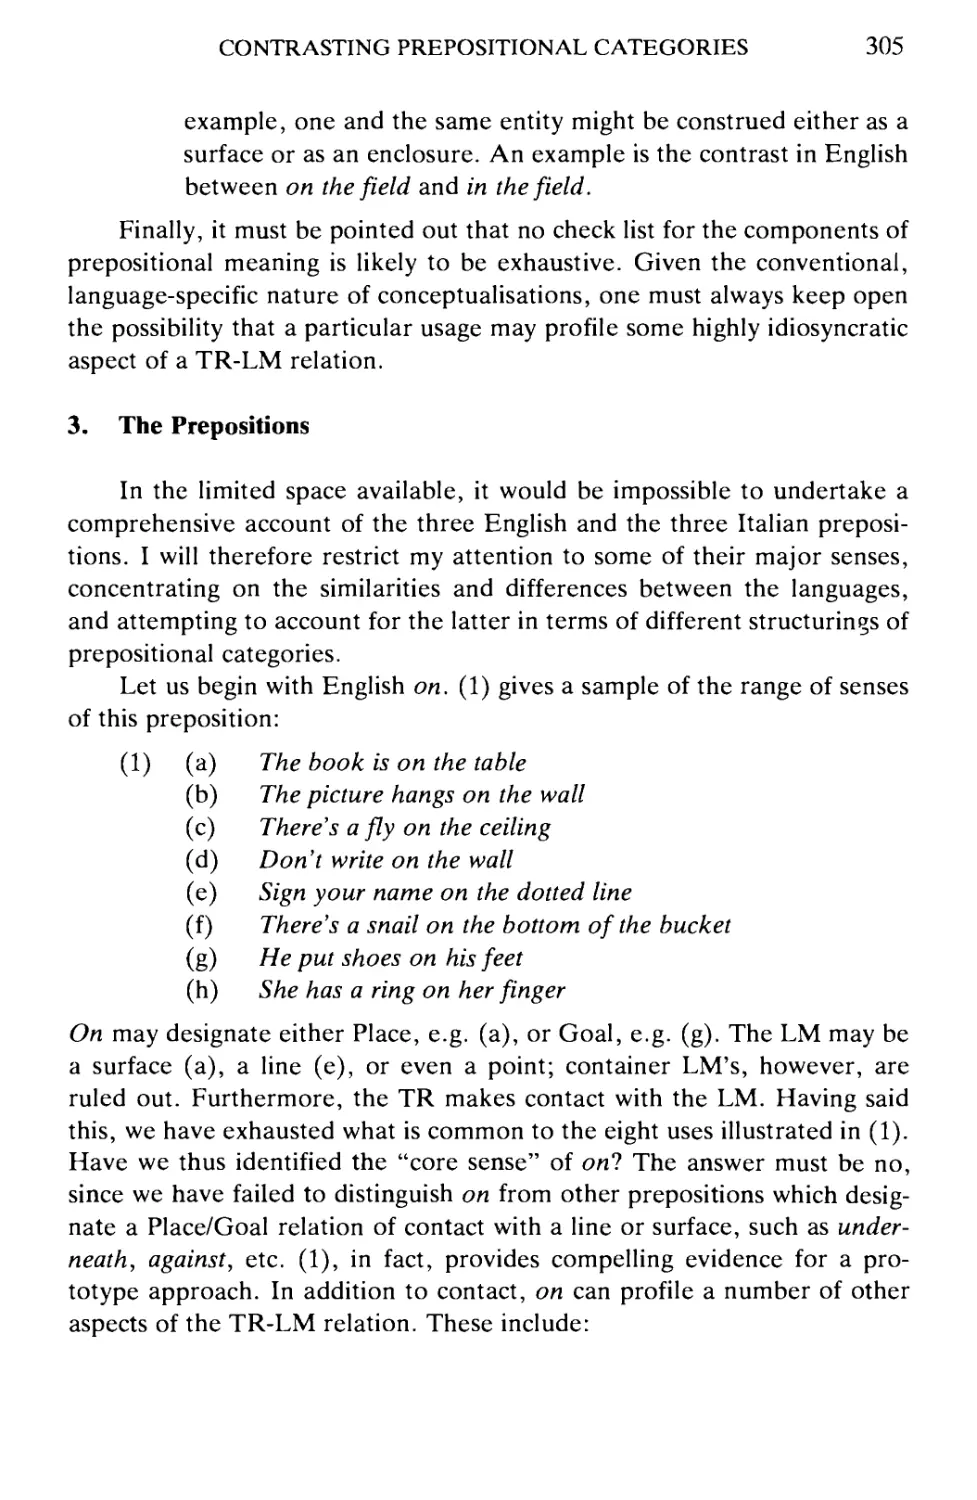 3. The Prepositions